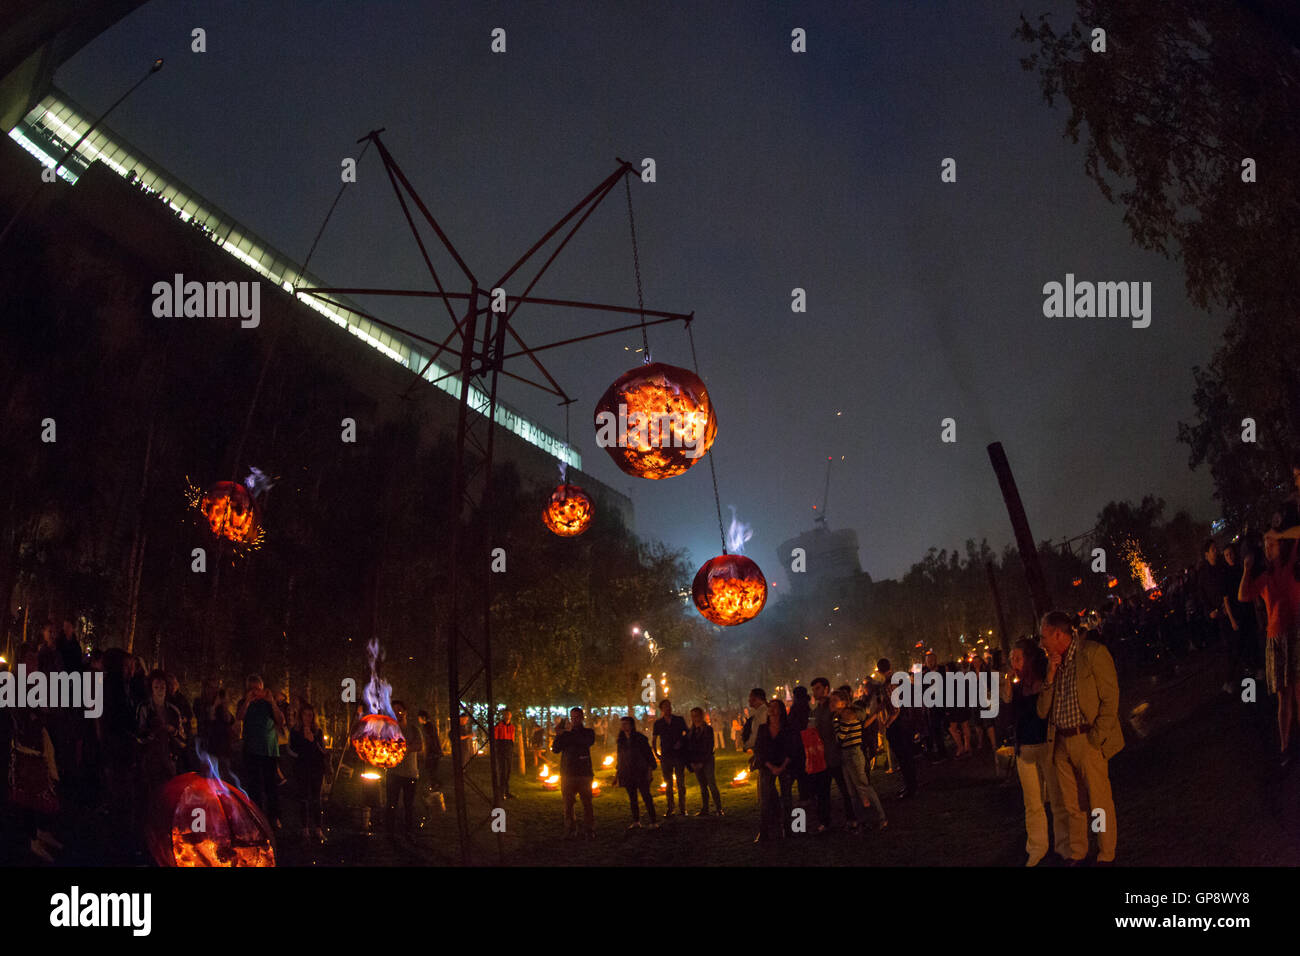 London, UK. 2nd September, 2016. Compagnie Carabosse, French fire alchemists, created a Fire Garden in front of the Tate Modern . on the Thames Korean,  Ik-Joong Kang created 'Floating Dreams'. One of the events which forms part of the festival marking the 350th anniversary of the Great Fire of London. Credit:  carol moir/Alamy Live News Stock Photo